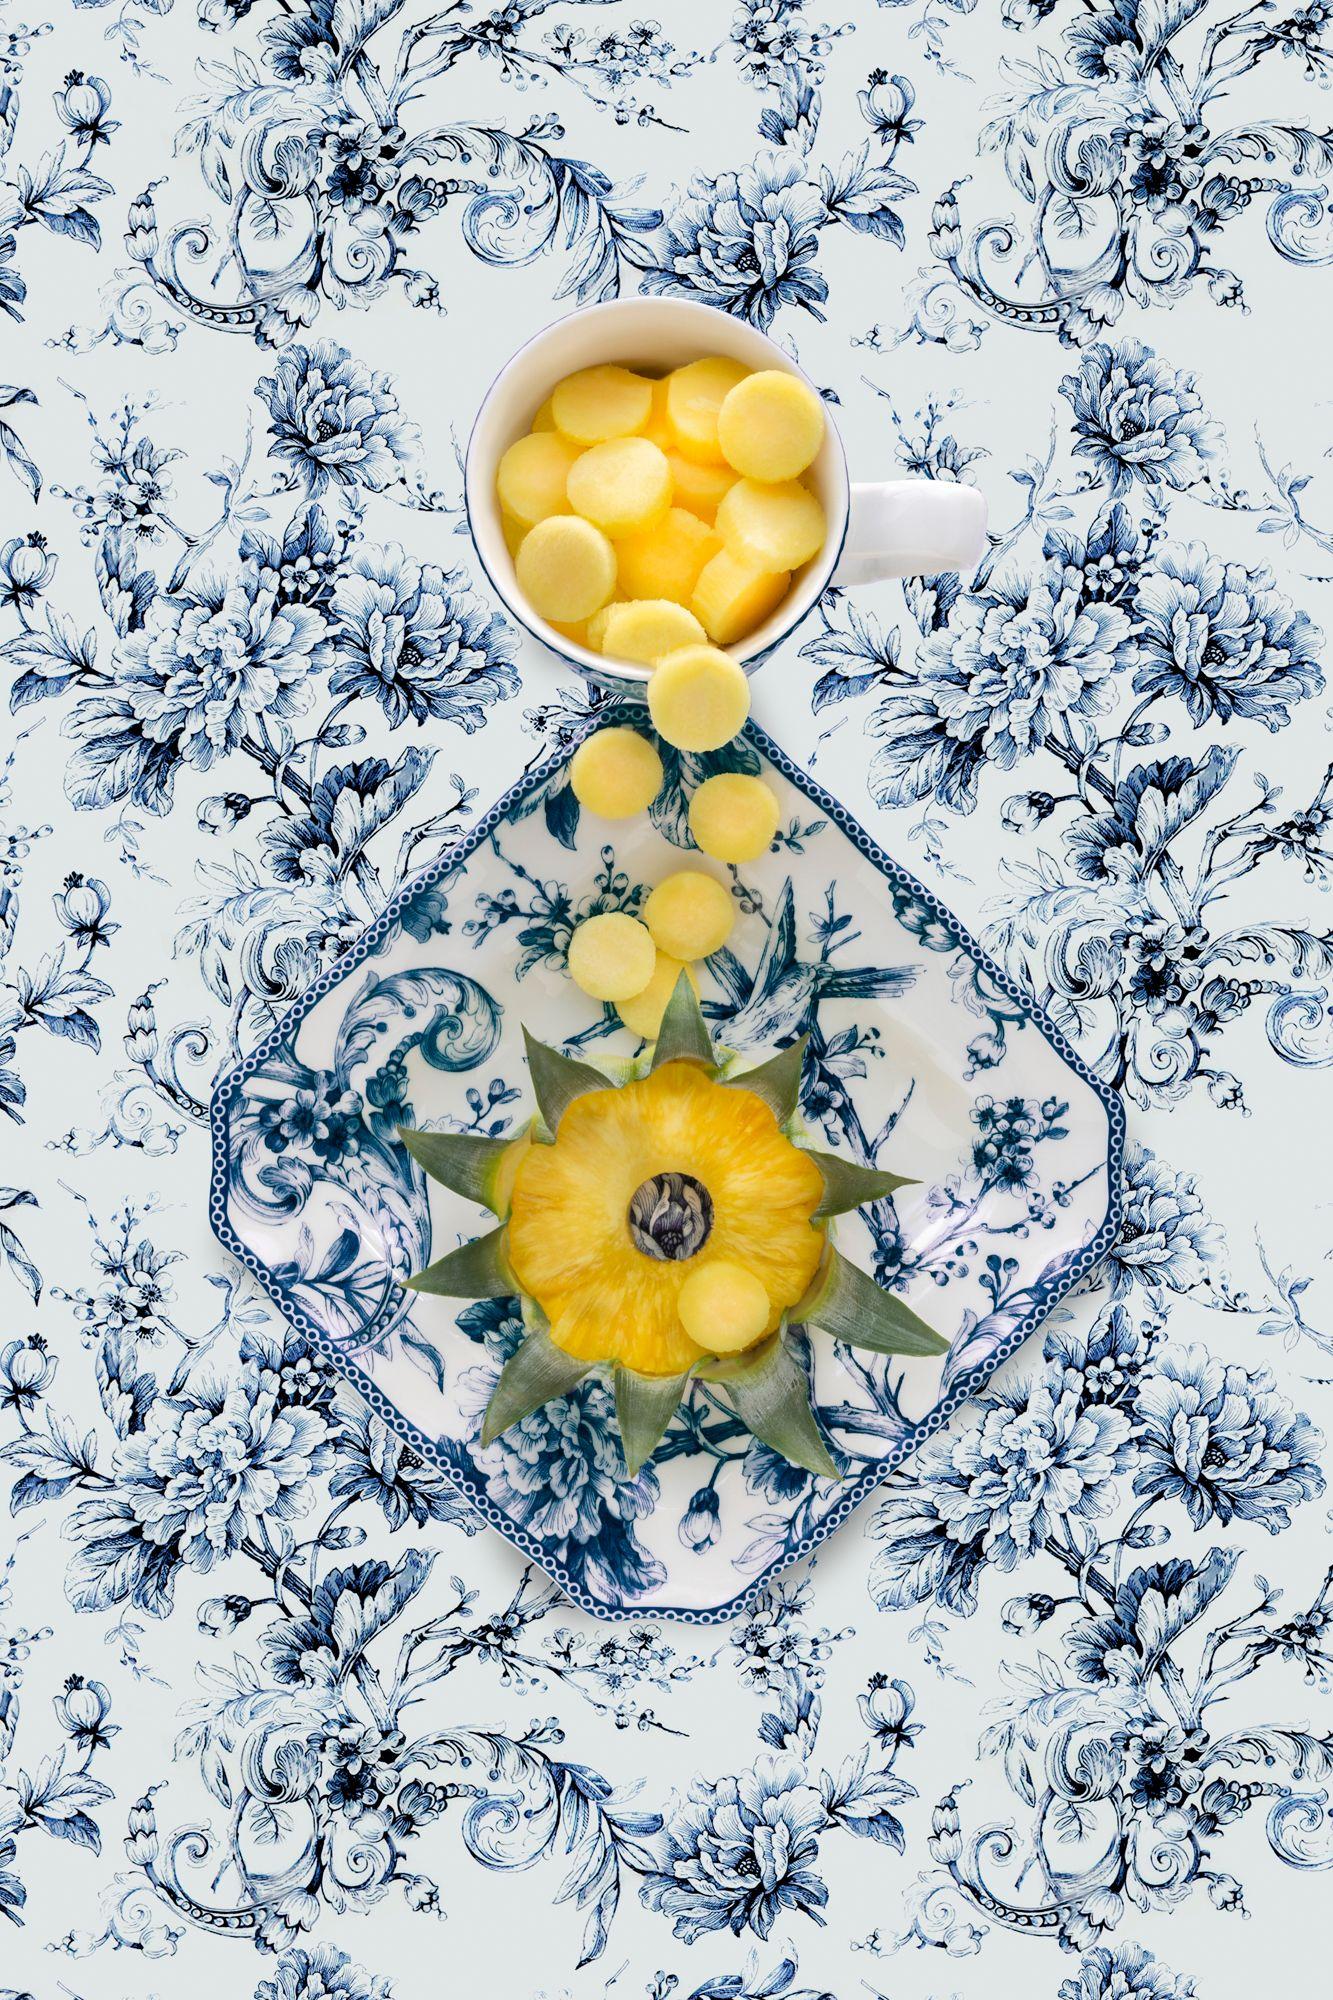 JP Terlizzi Color Photograph - Adelaide Blue with Pineapple - Blue, white & yellow floral food still life